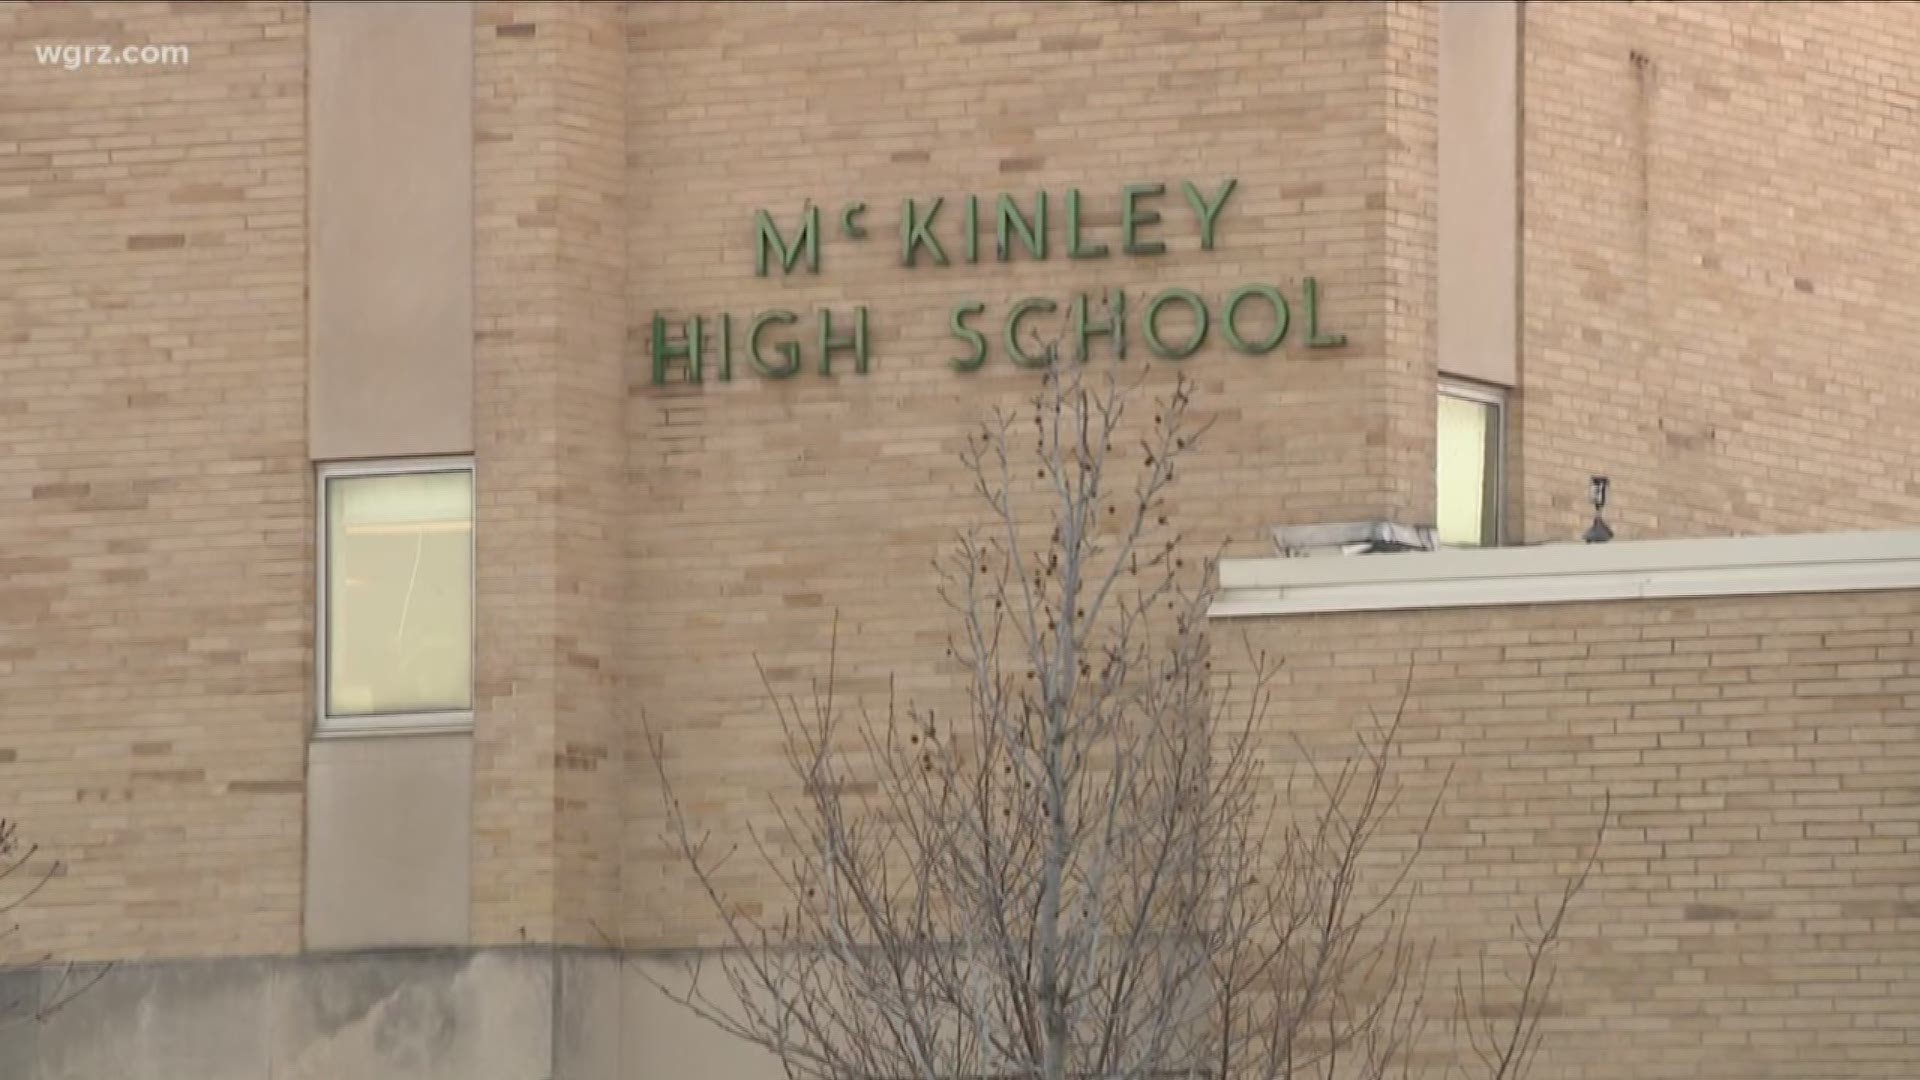 McKinley teachers are growing more frustrated with lack of discipline and tardiness.